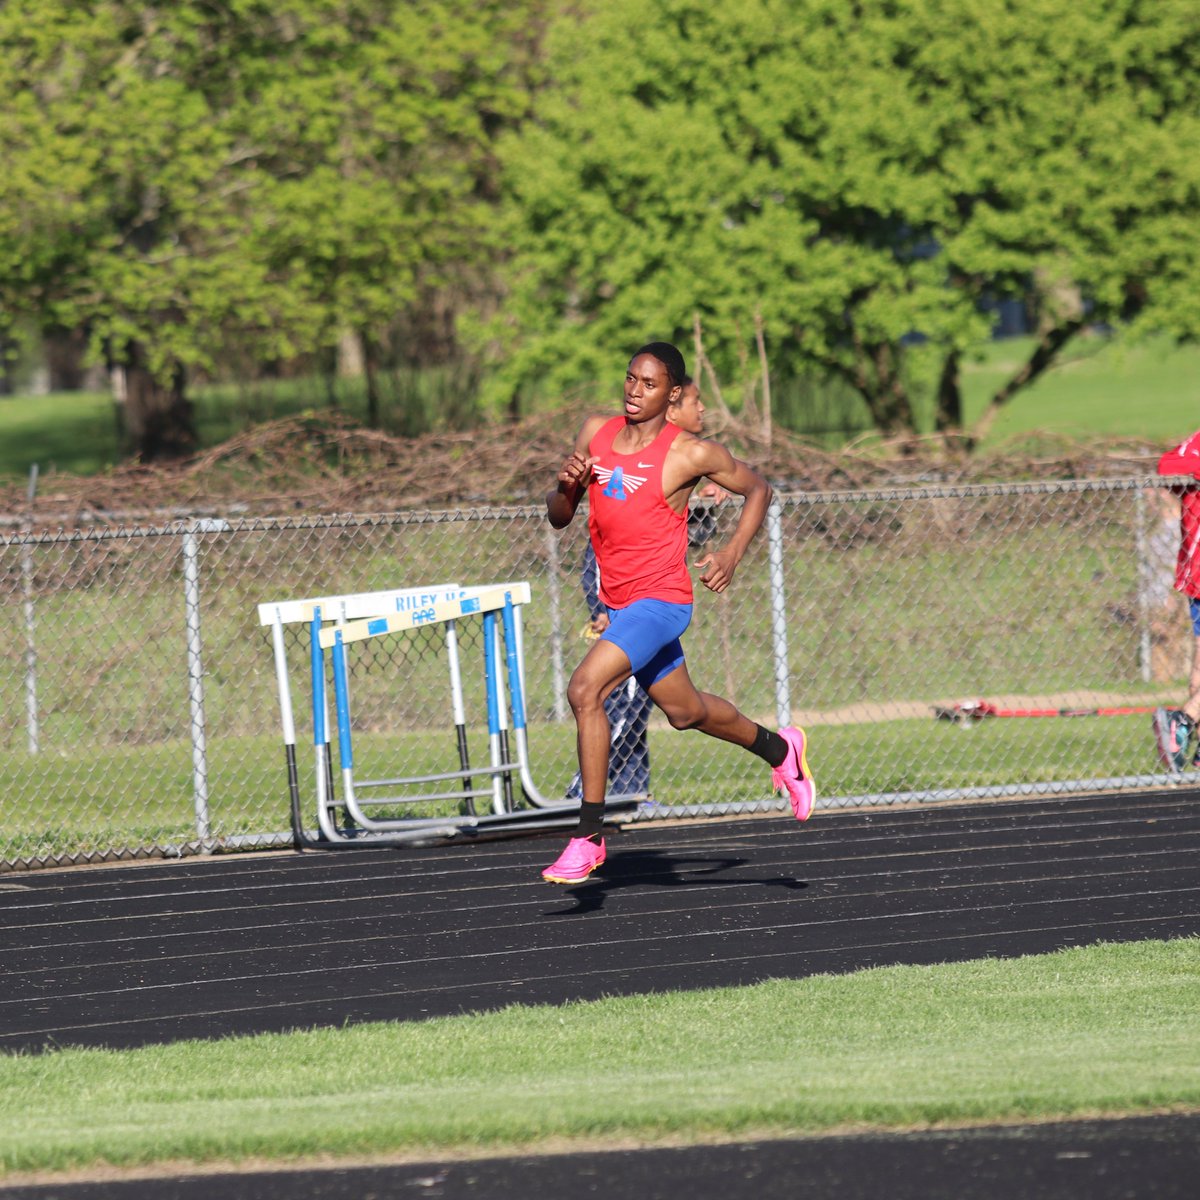 ee some of the pictures from the Boys Track and Field meet against SB Riley. The entire gallery can be seen at johnadamsathletics.com/photos
🏃‍♂️🦅🔴⚪️🔵📸🏃‍♂️